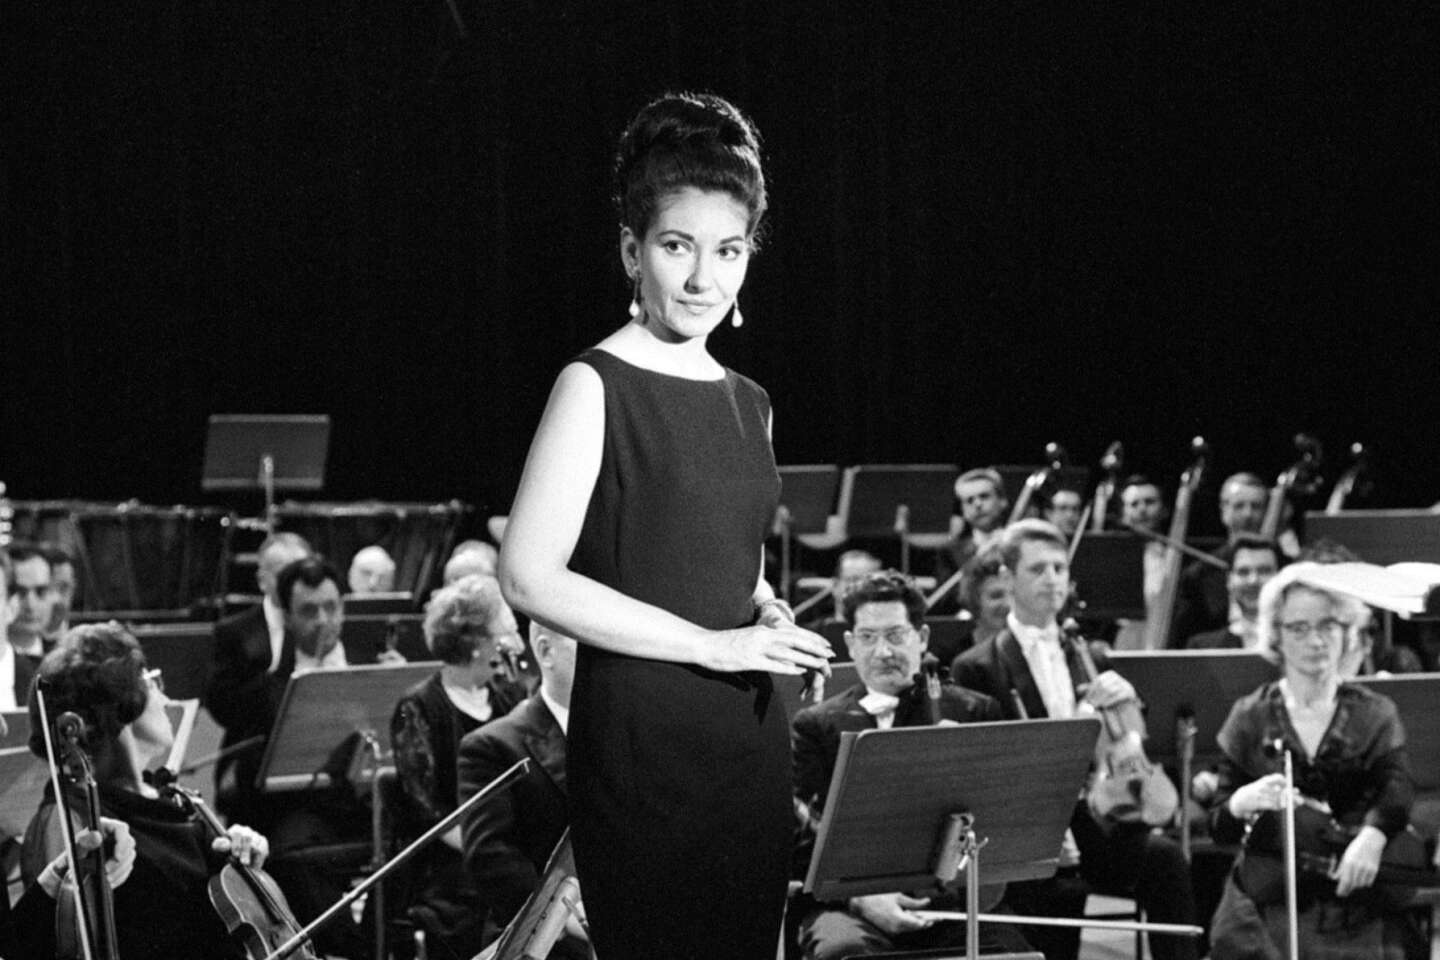 On public service, tribute provided to Maria Callas for the centenary of her birth